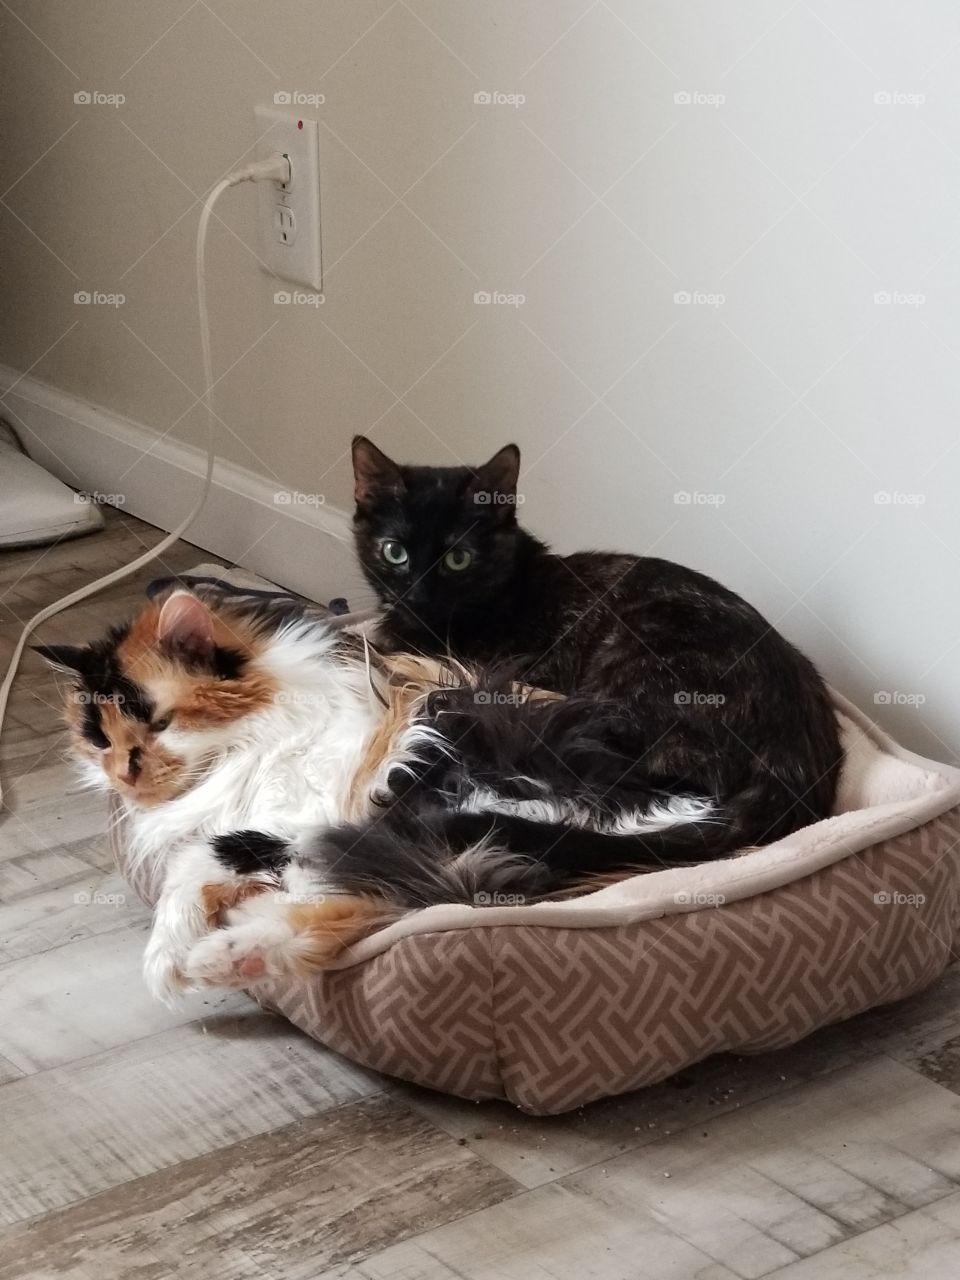 this bed is not big enough for two cats